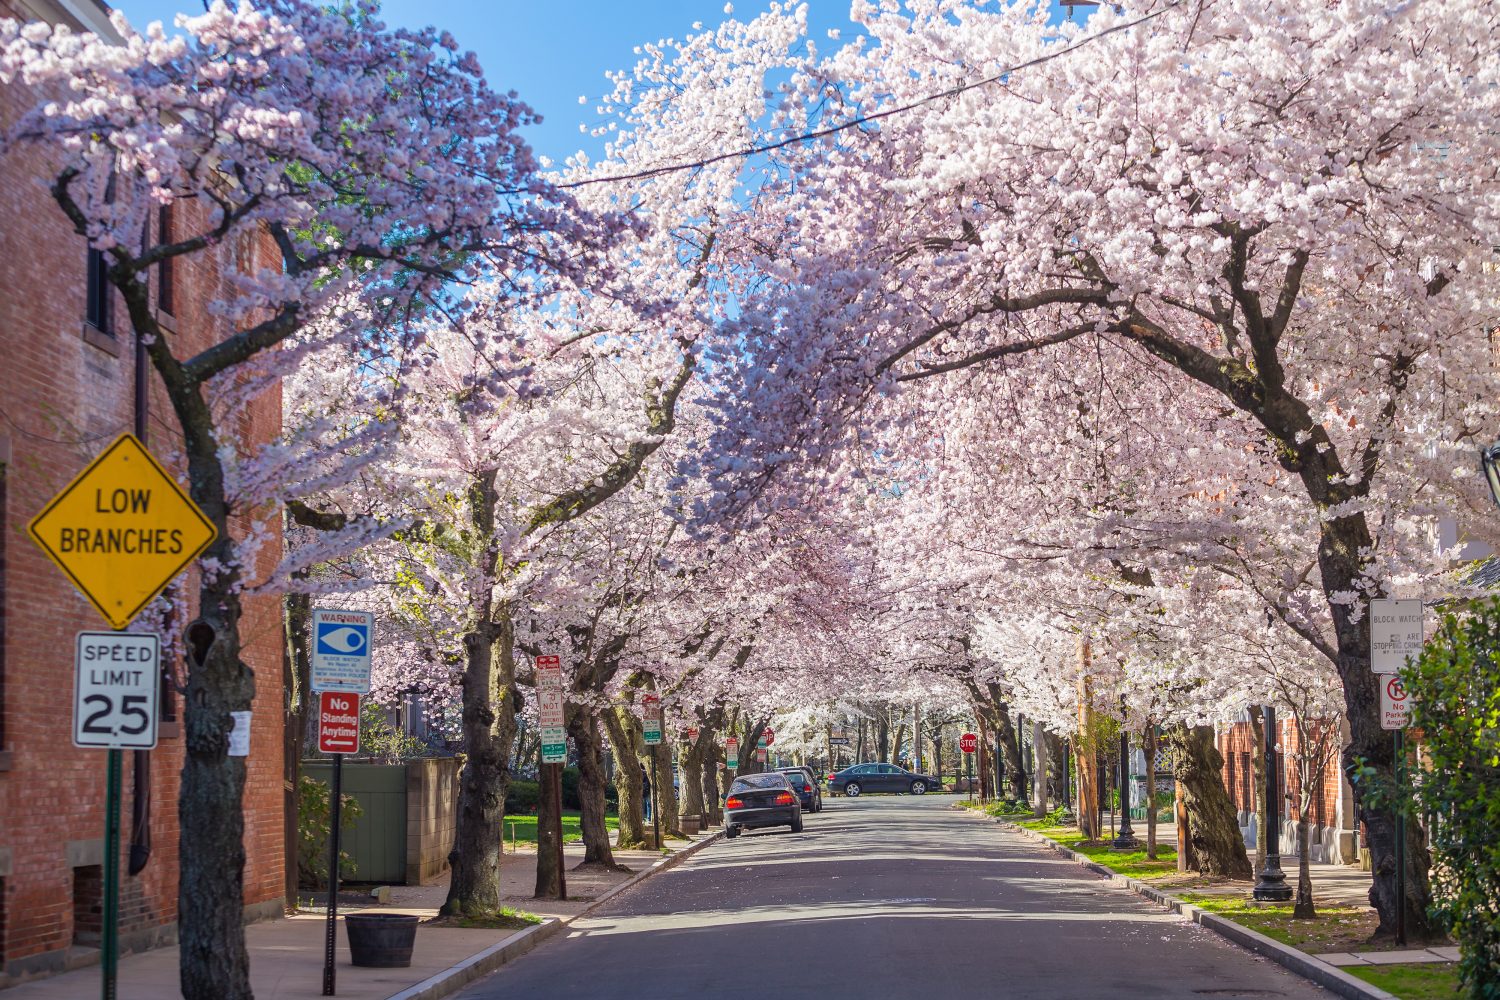 <p>There are about 72 Yoshino cherry blossom trees planted at Wooster Square in New Haven. Each spring the city celebrates the blooms with its Cherry Blossom Festival.</p><p>Sharks, lions, alligators, and more! Don’t miss today’s latest and most exciting animal news. <strong><a href="https://www.msn.com/en-us/channel/source/AZ%20Animals%20US/sr-vid-7etr9q8xun6k6508c3nufaum0de3dqktiq6h27ddeagnfug30wka">Click here to access the A-Z Animals profile page</a> and be sure to hit the <em>Follow</em> button here or at the top of this article!</strong></p> <p>Have feedback? Add a comment below!</p>